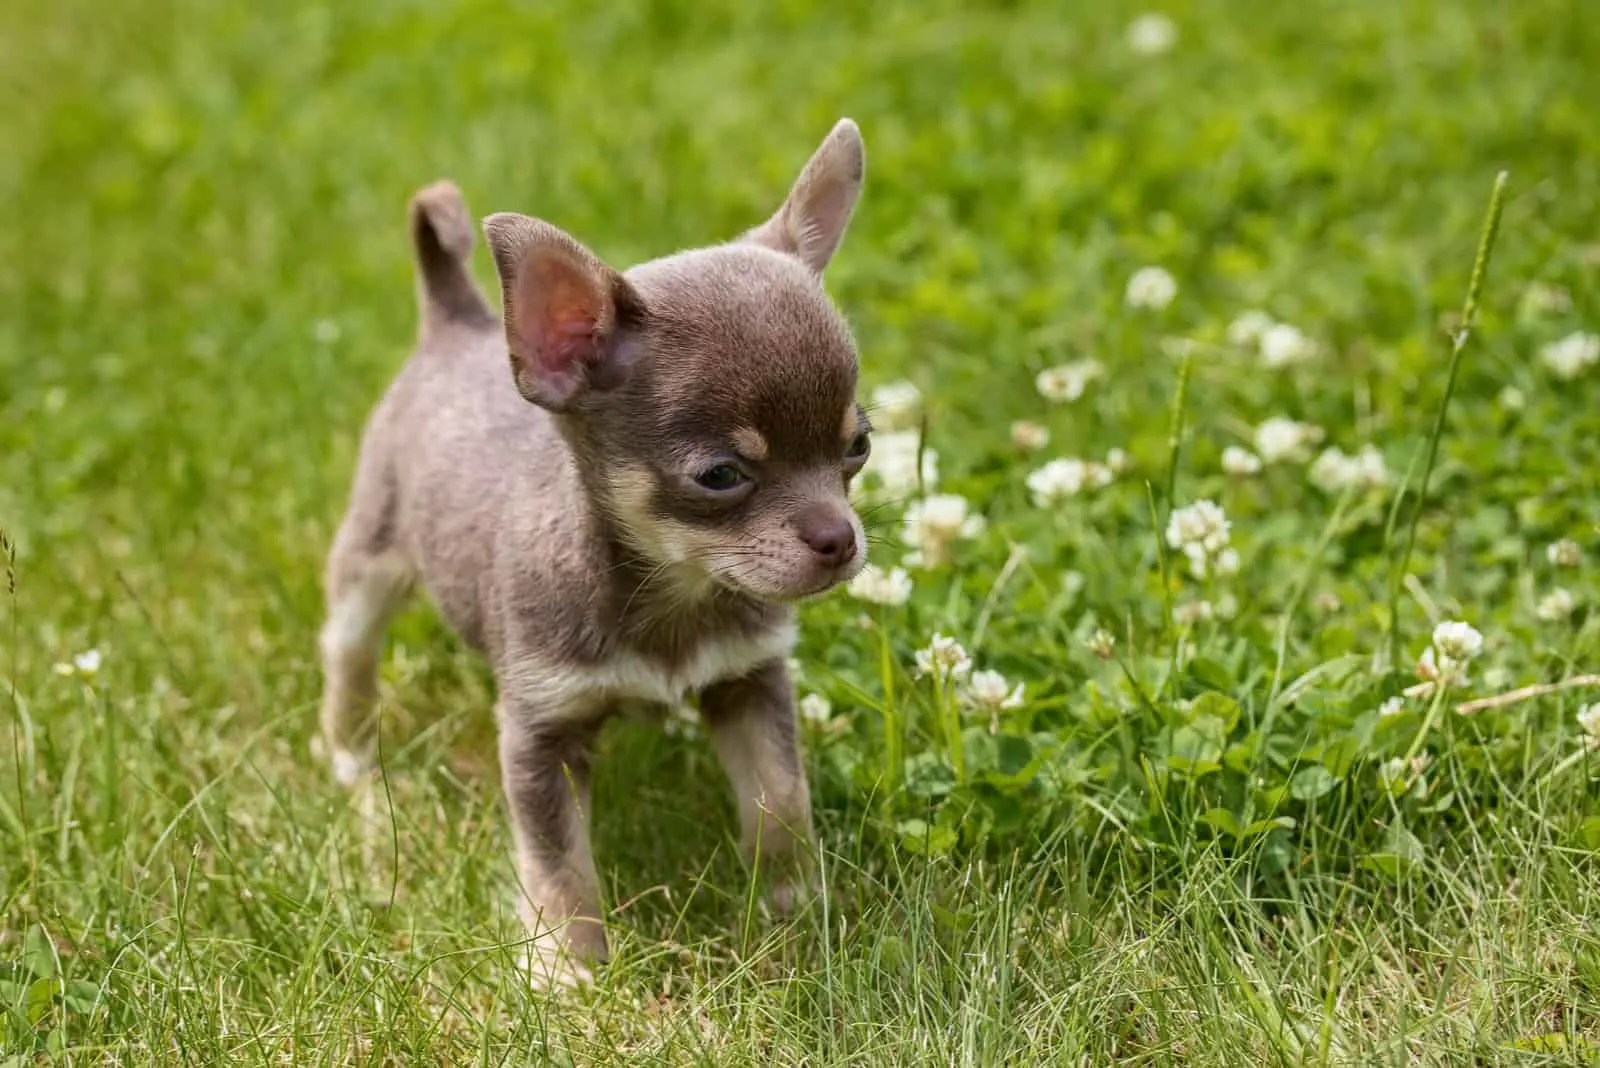 Chihuahua puppy standing on grass